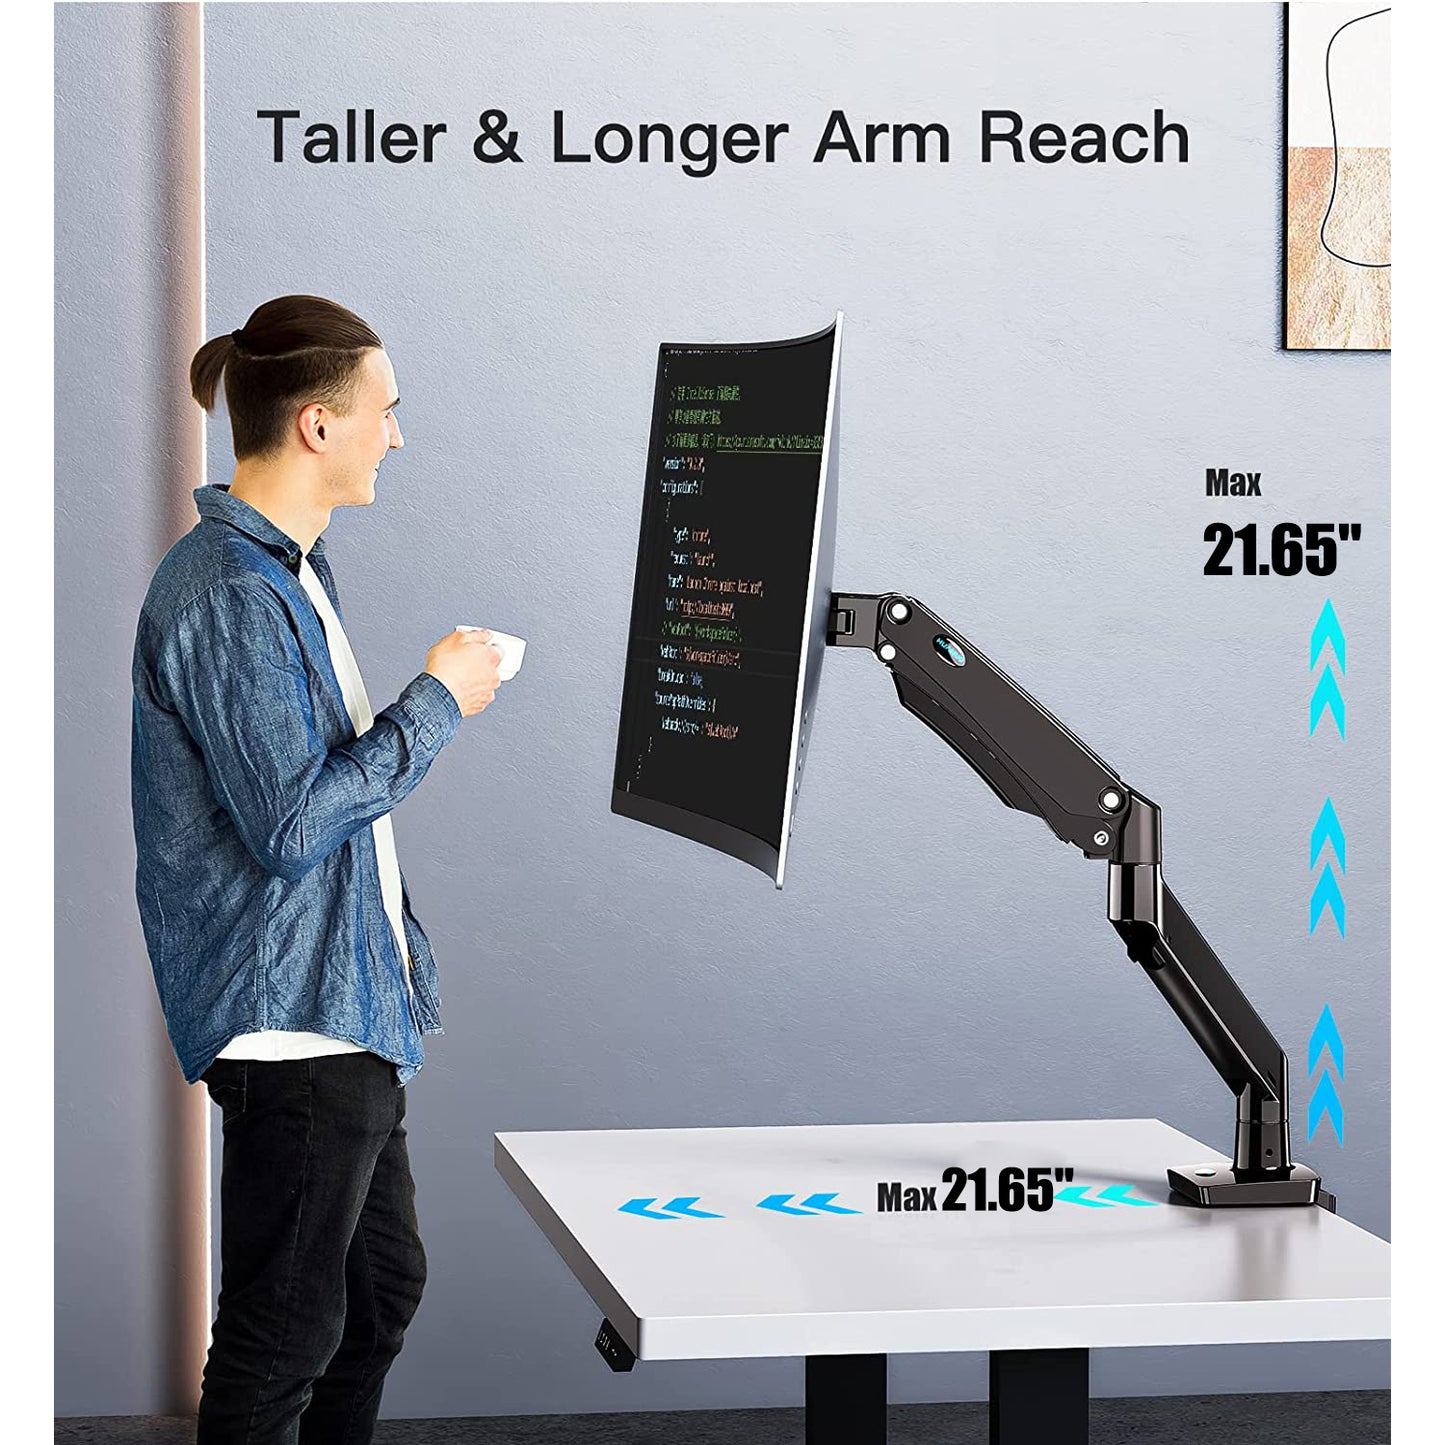 Single Monitor Mount For 22" To 35" Screens